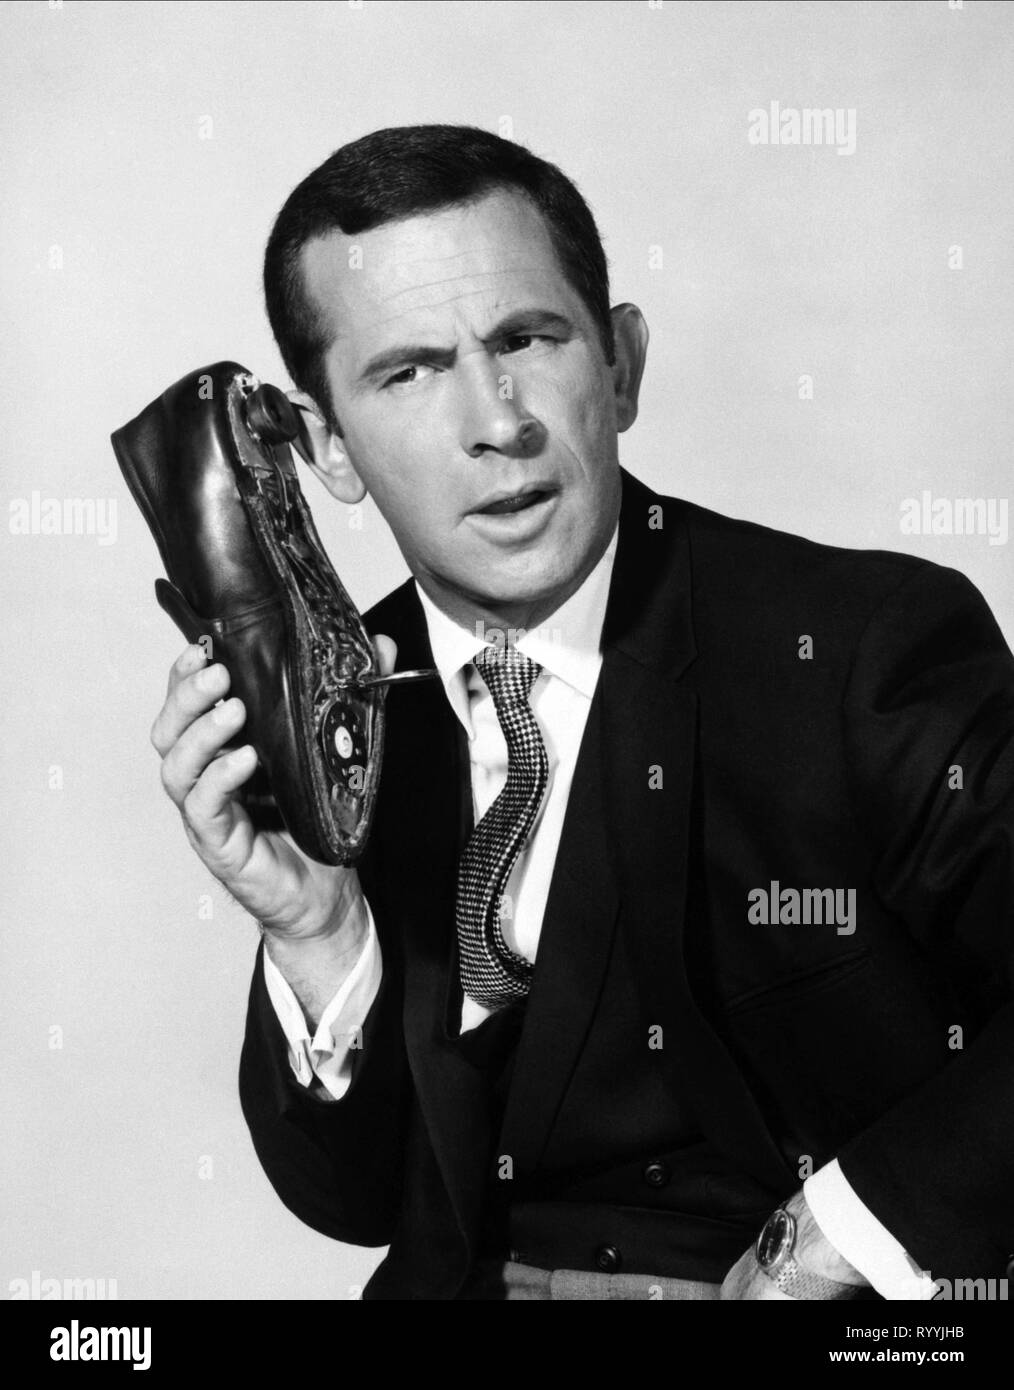 Don adams Black and White Stock Photos & Images - Alamy